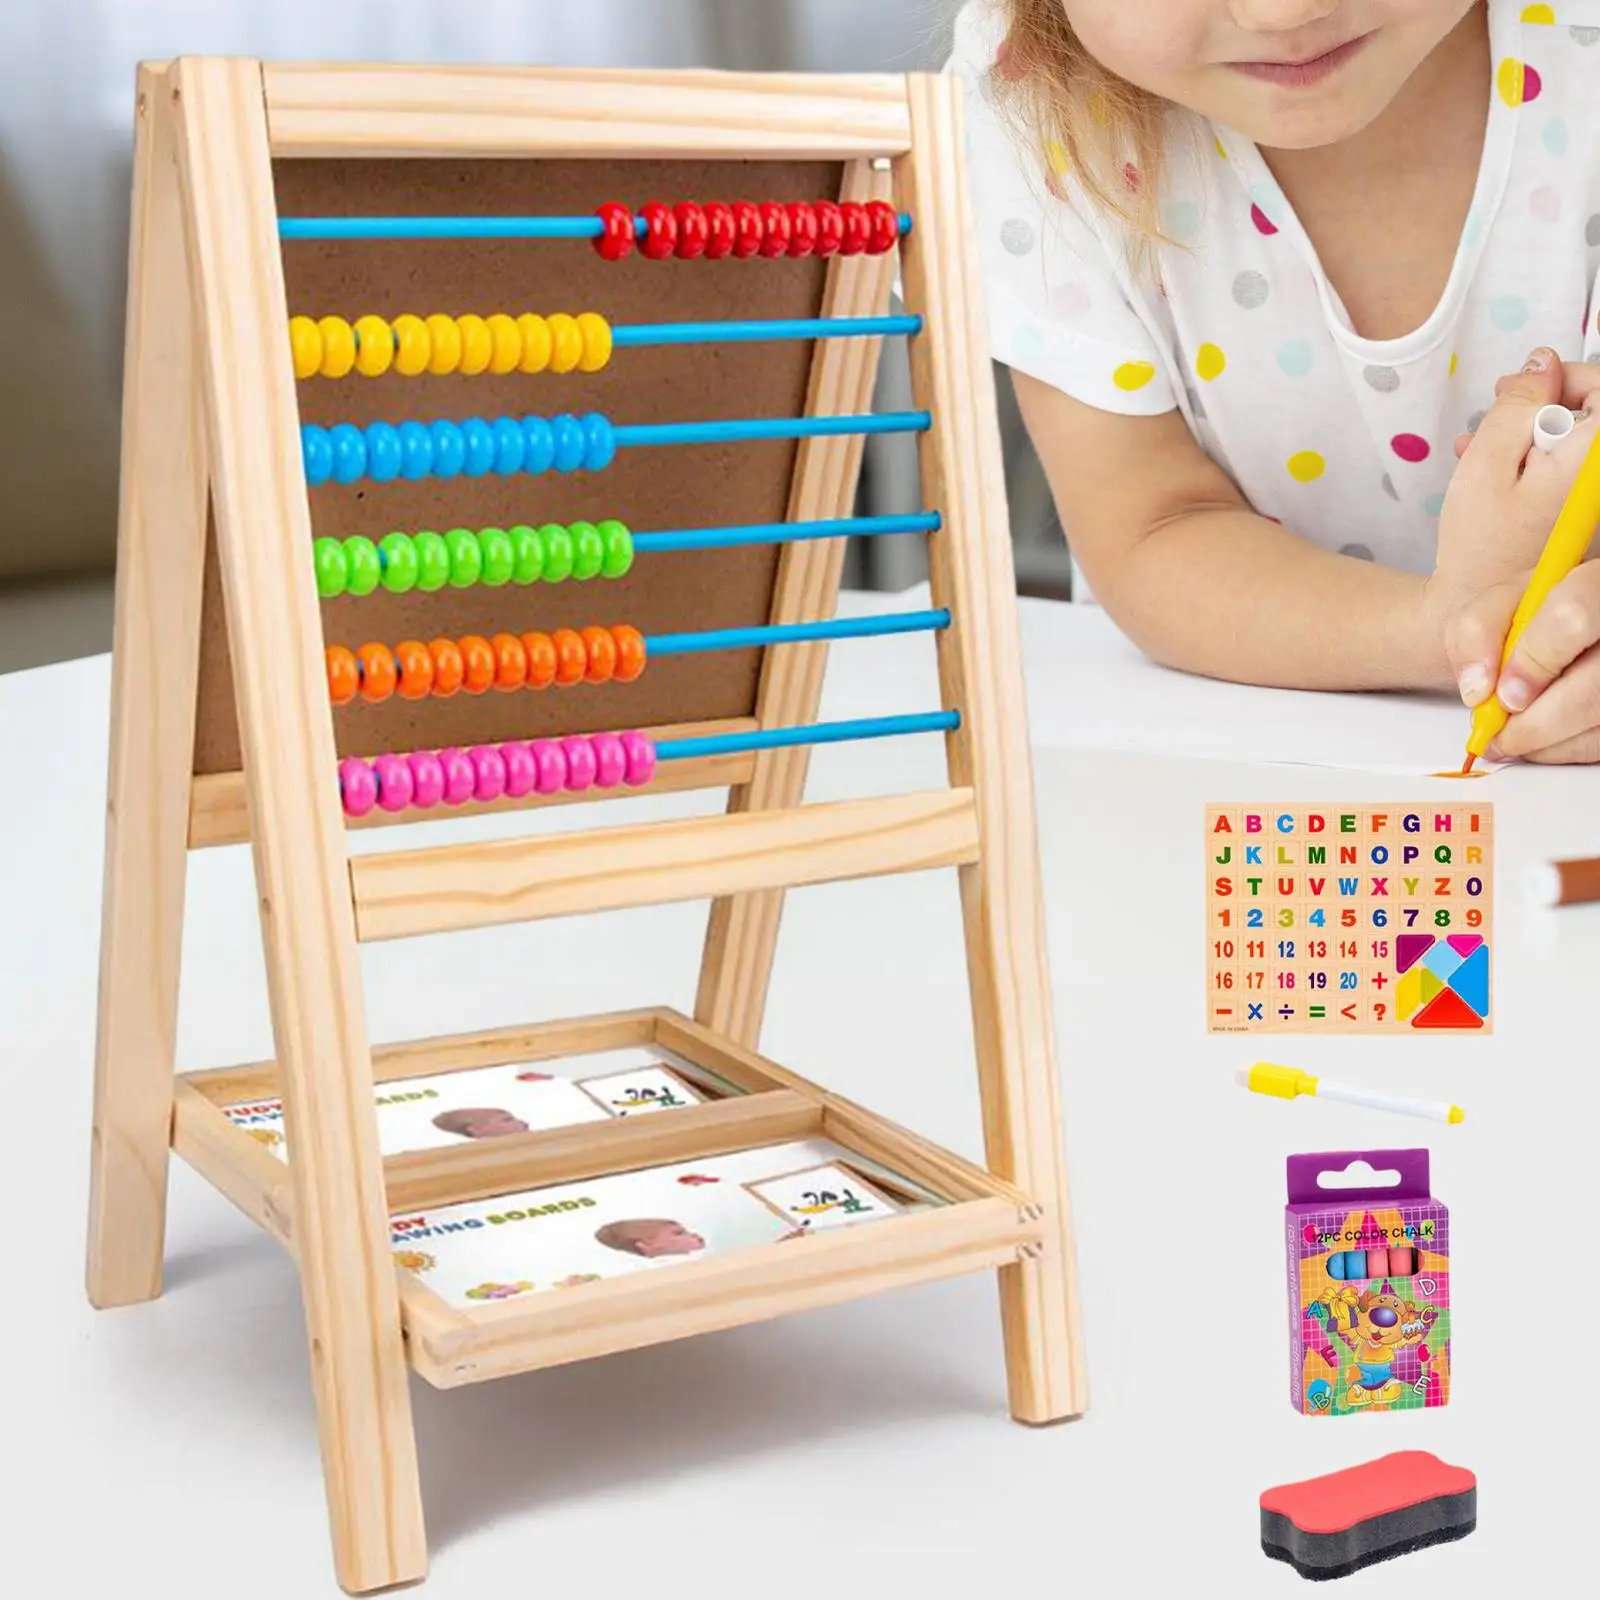 Math Teaching Aids Early Developmental Toys Educational Math Learning Toys Math Games for Boys Kids Girls Children Gifts